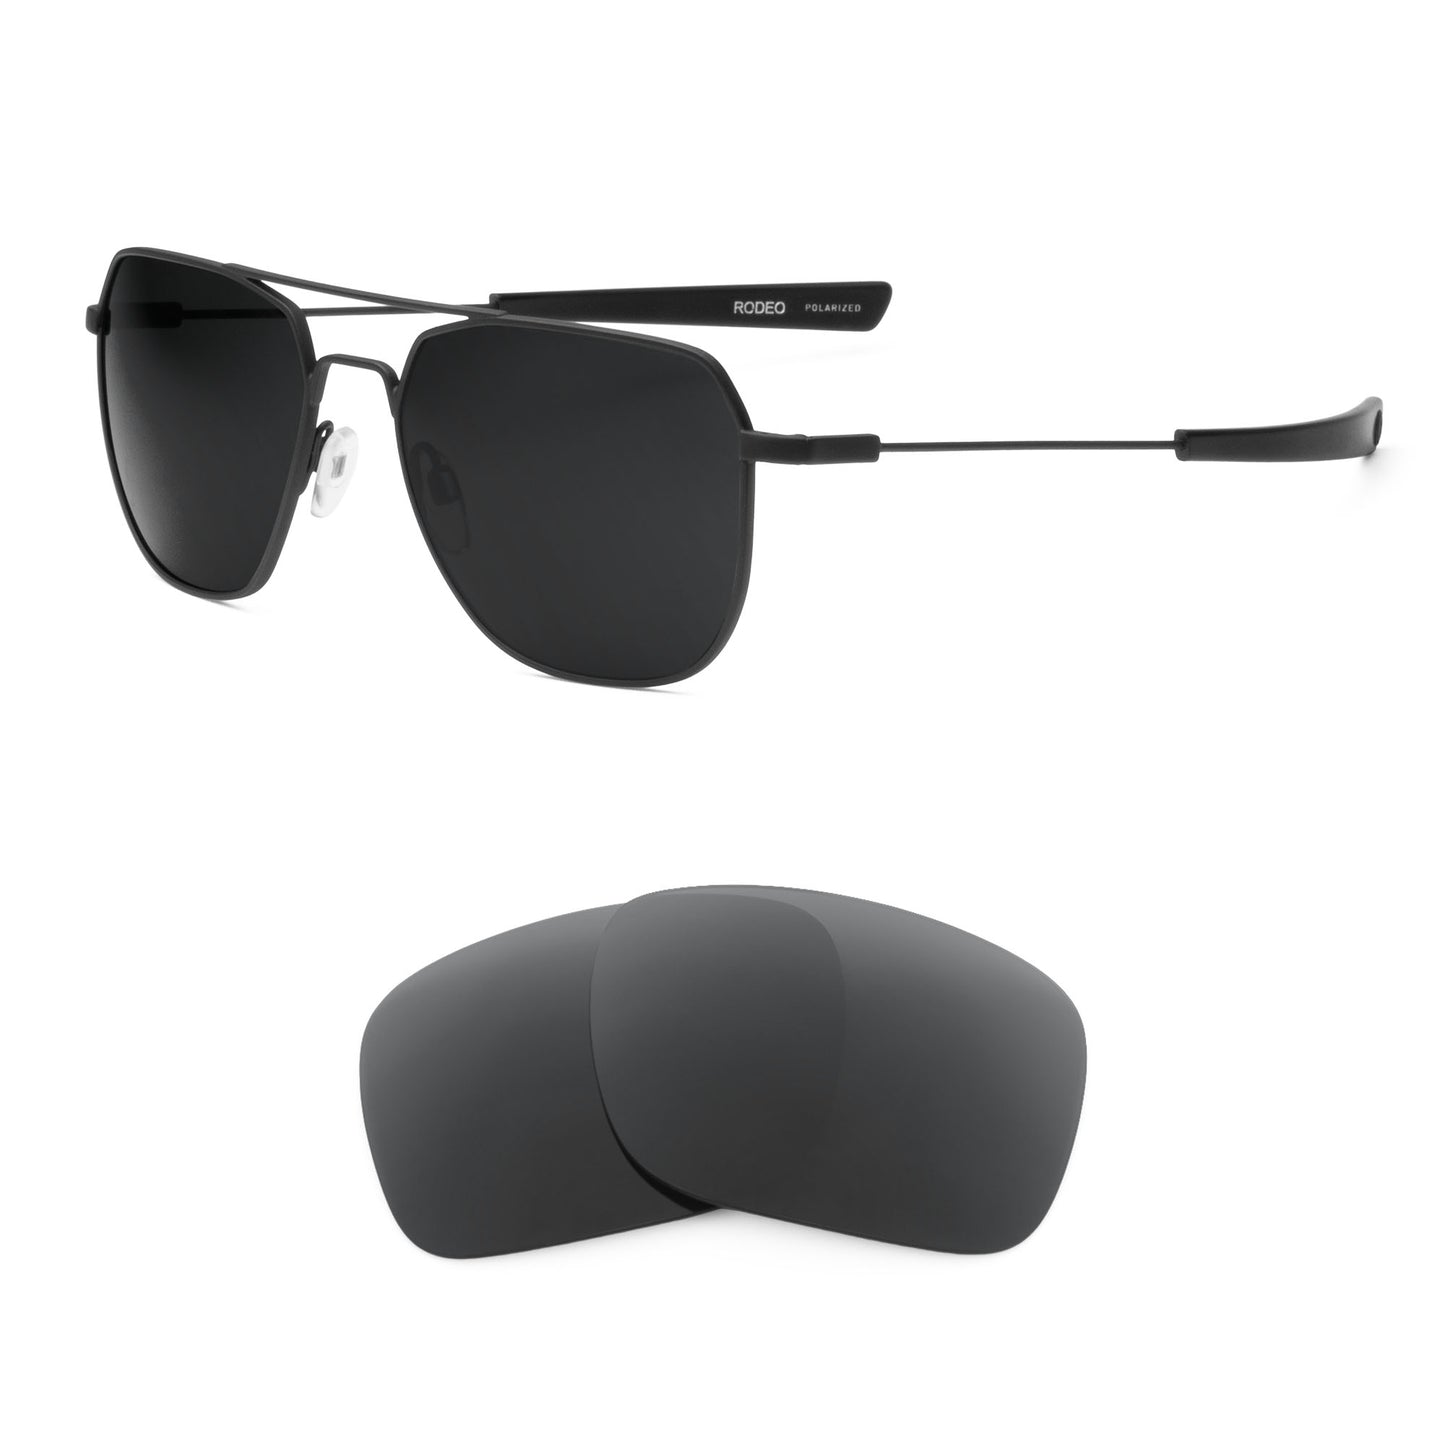 Electric Rodeo sunglasses with replacement lenses